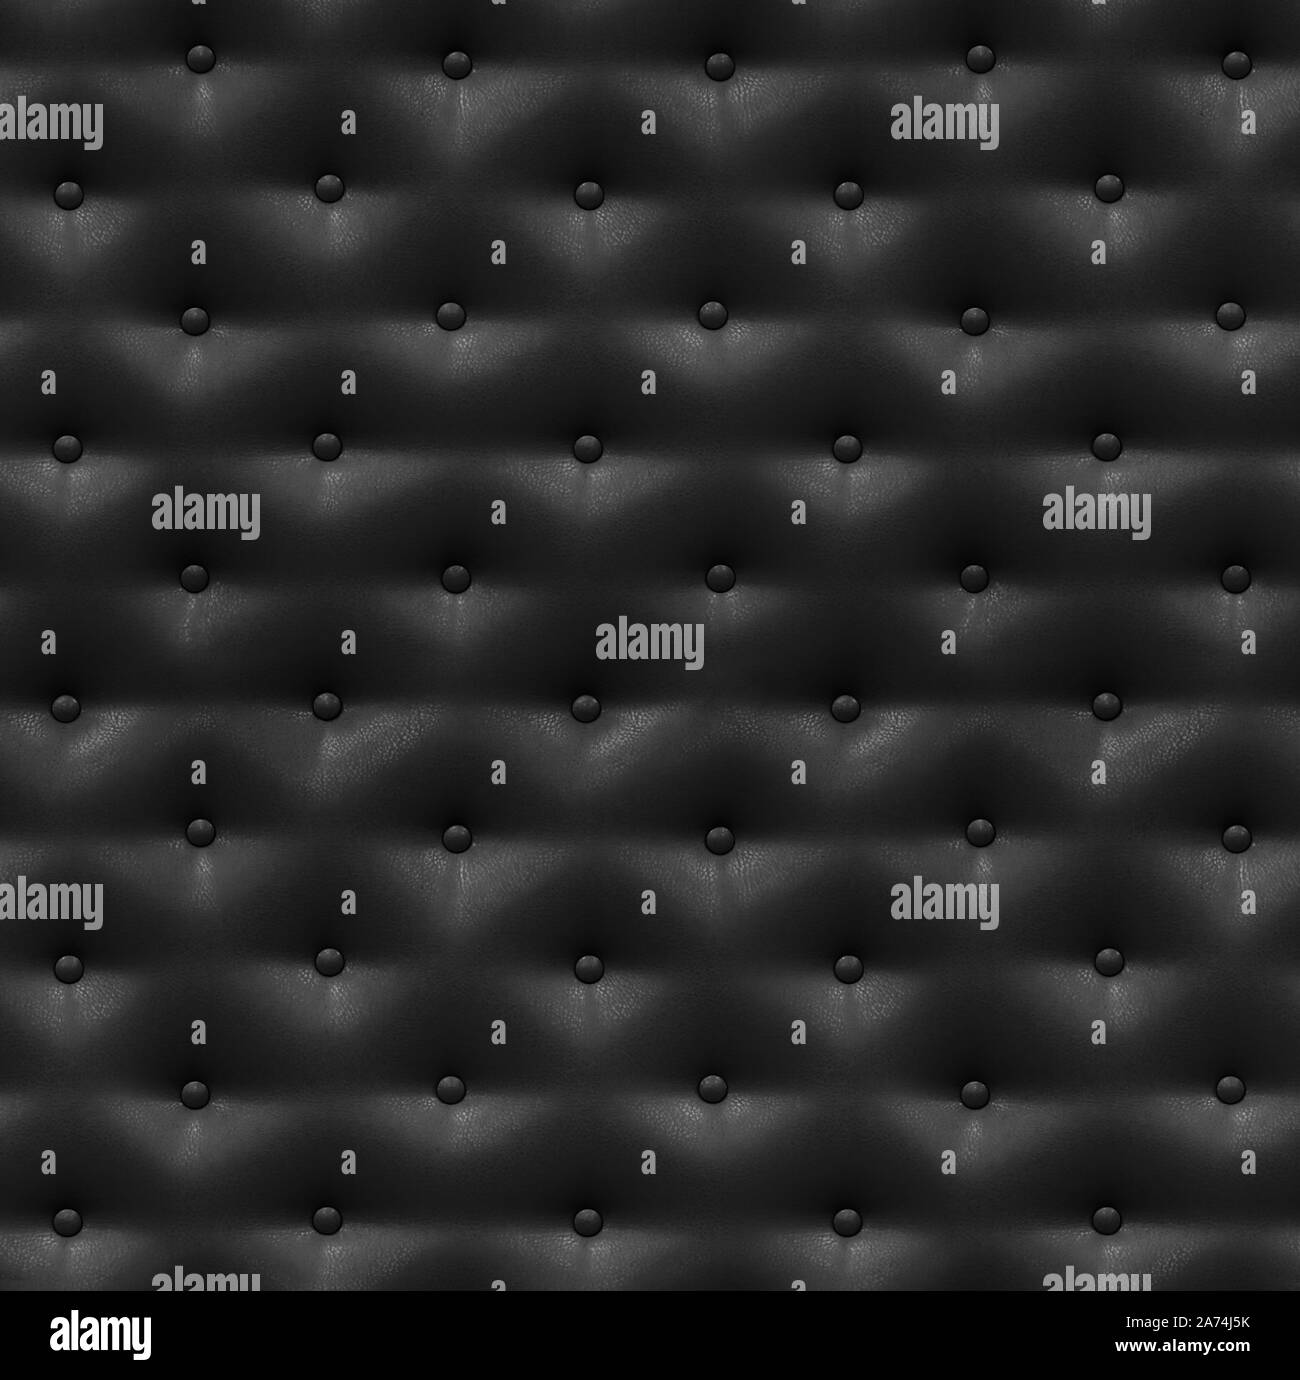 Black leather seamless pattern with buttons Stock Photo